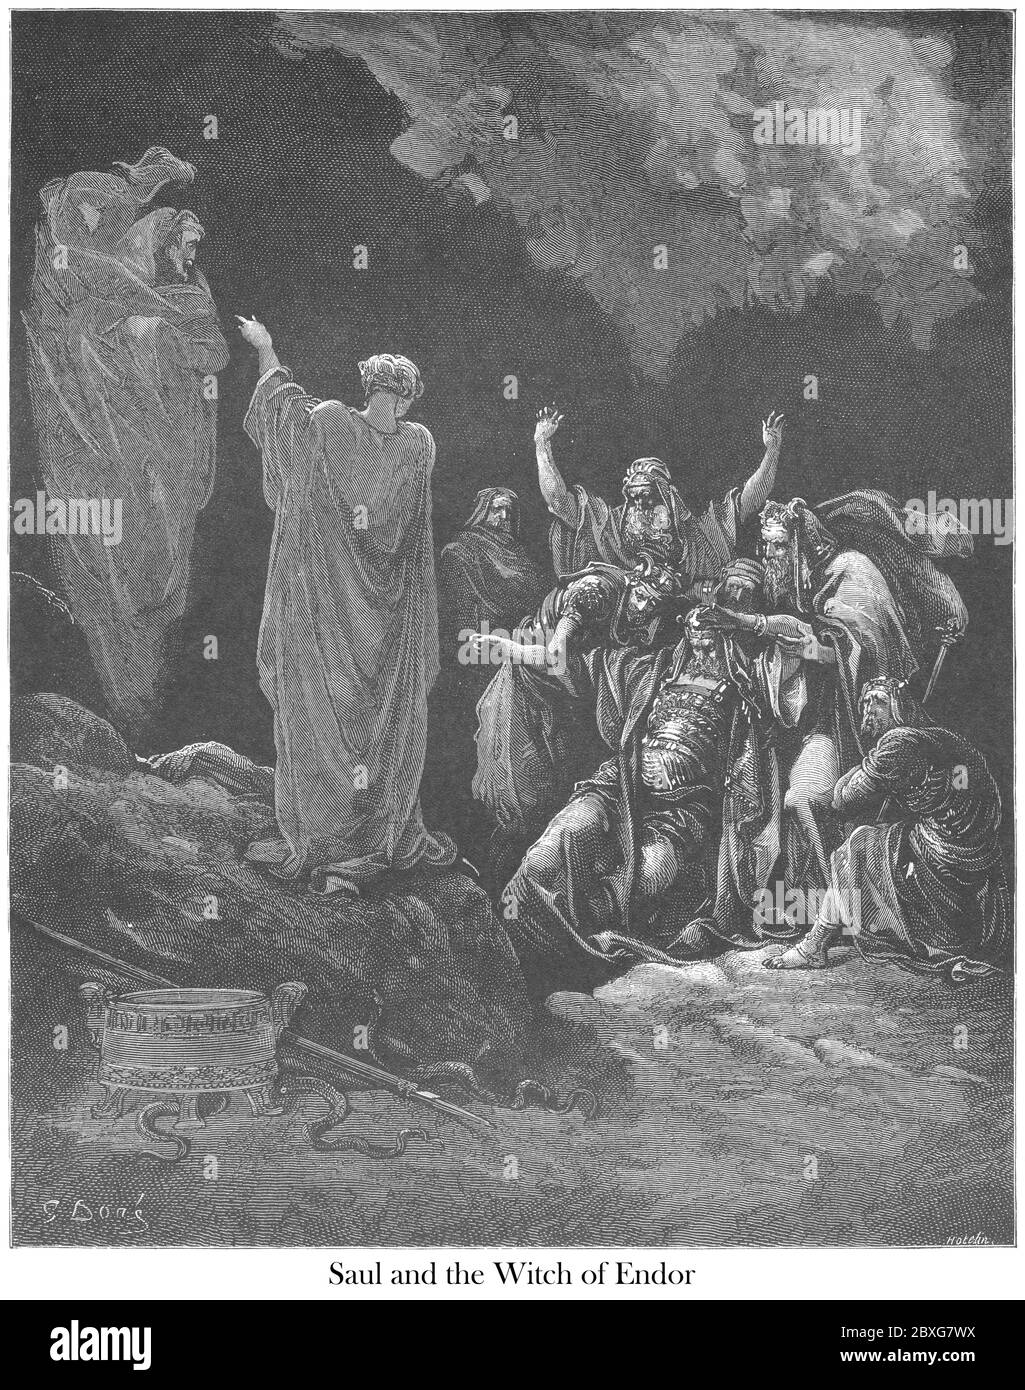 Saul and the Witch of Endor 1 Samuel 28:7 From the book 'Bible Gallery' Illustrated by Gustave Dore with Memoir of Dore and Descriptive Letter-press by Talbot W. Chambers D.D. Published by Cassell & Company Limited in London and simultaneously by Mame in Tours, France in 1866 Stock Photo